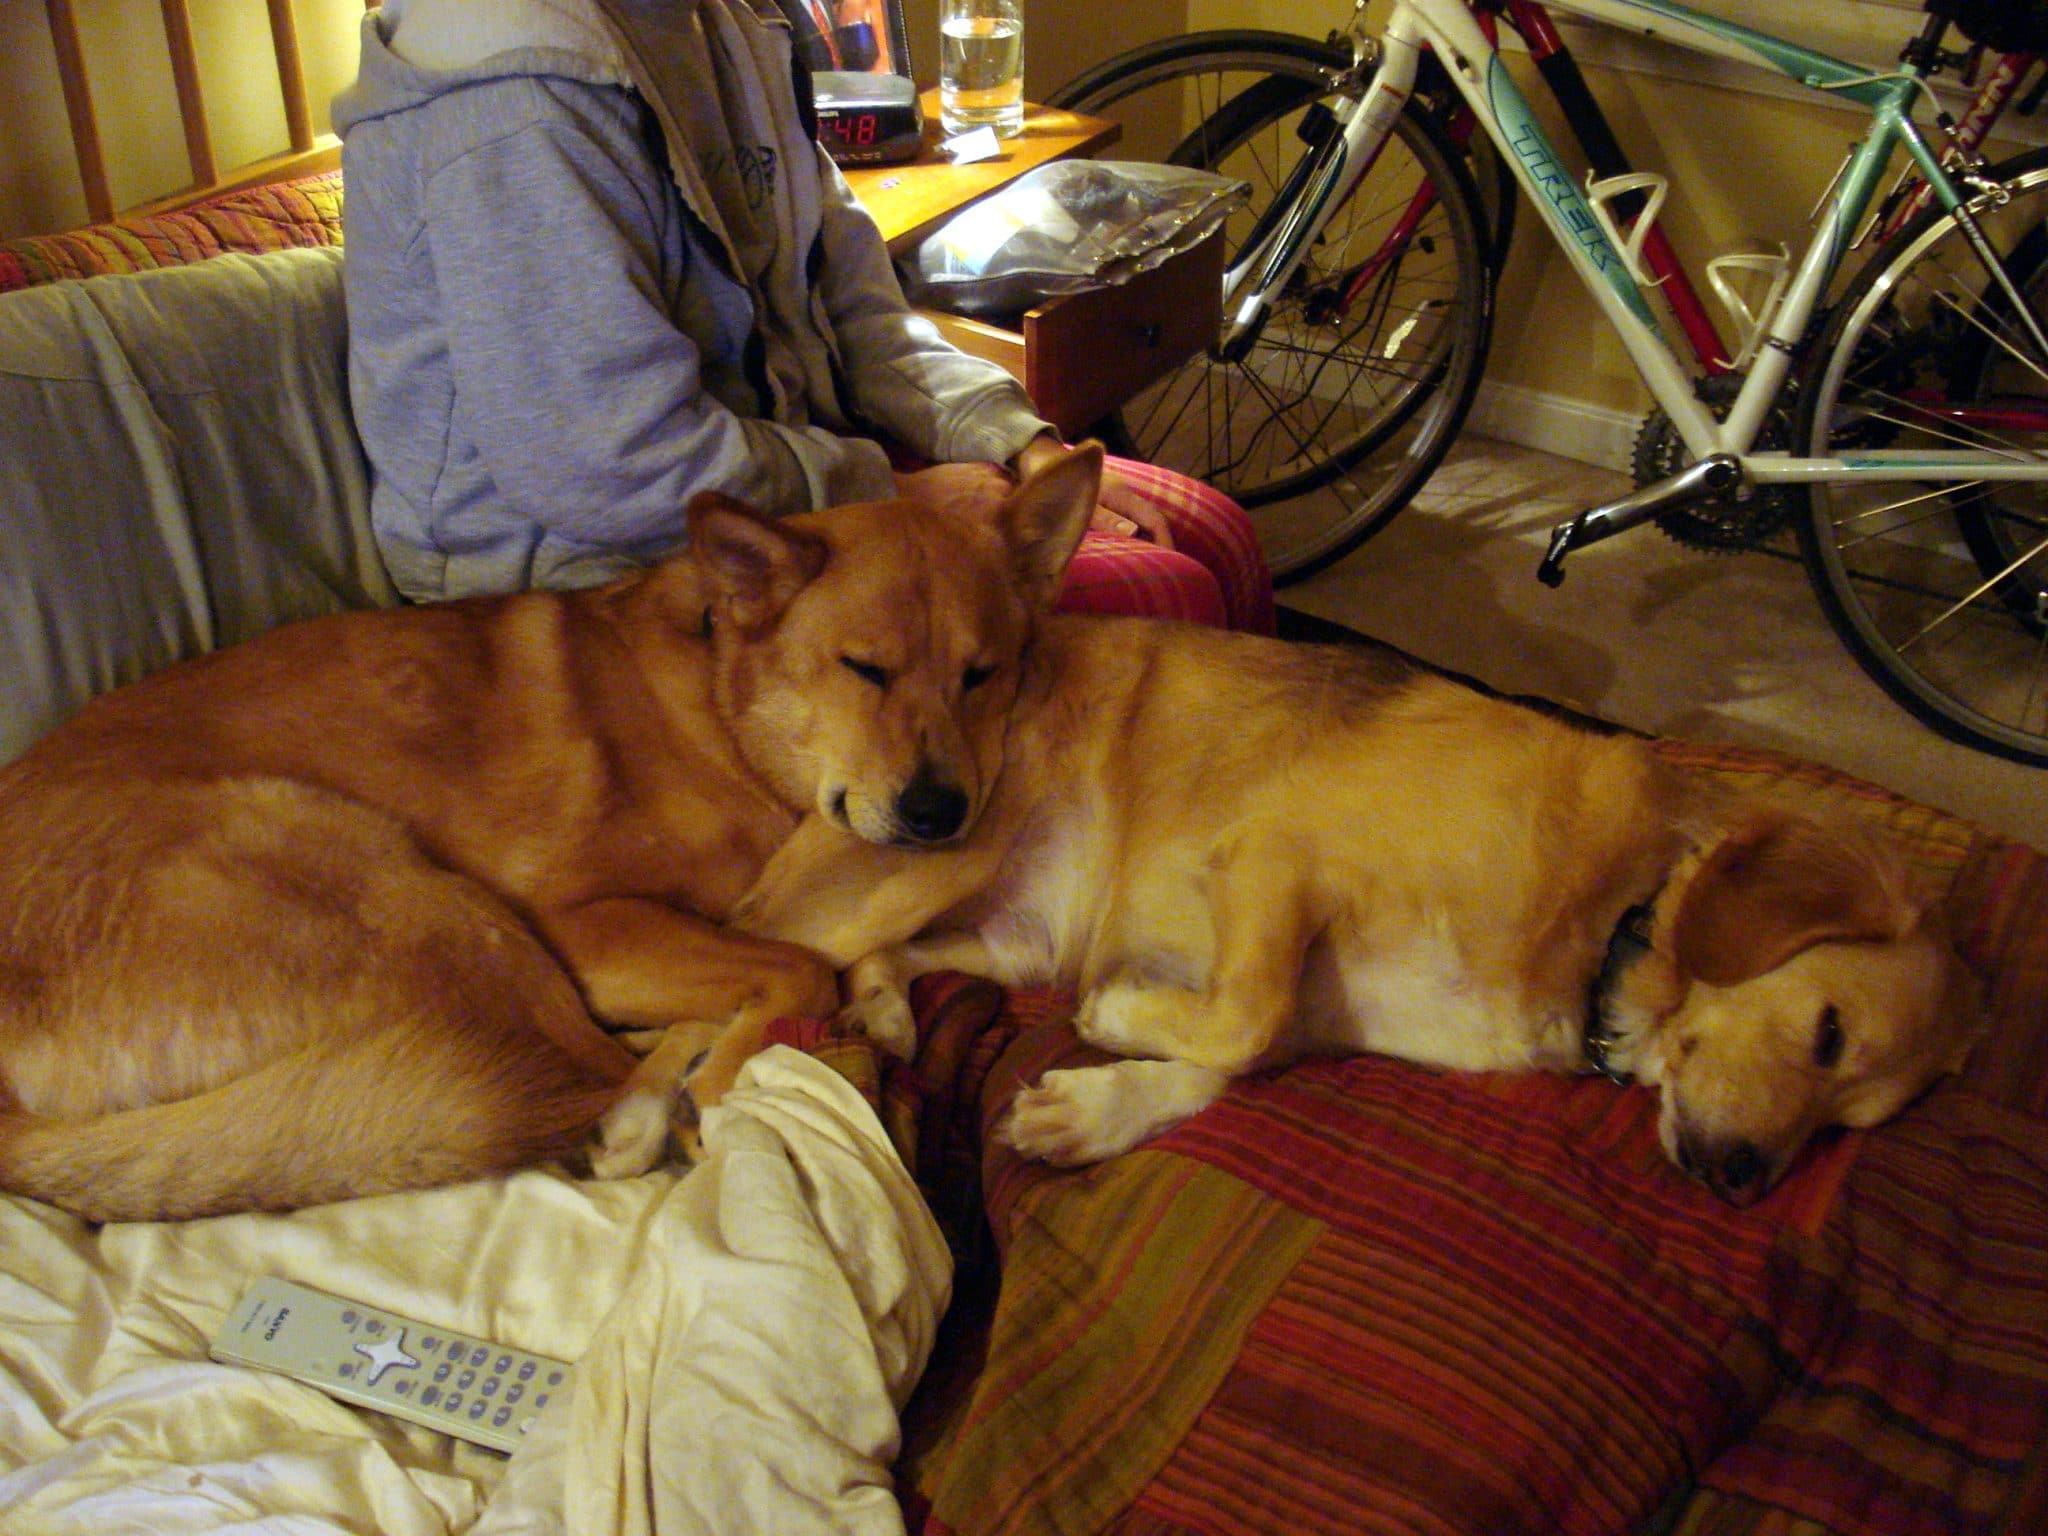 Dogs cuddling, asleep on couch